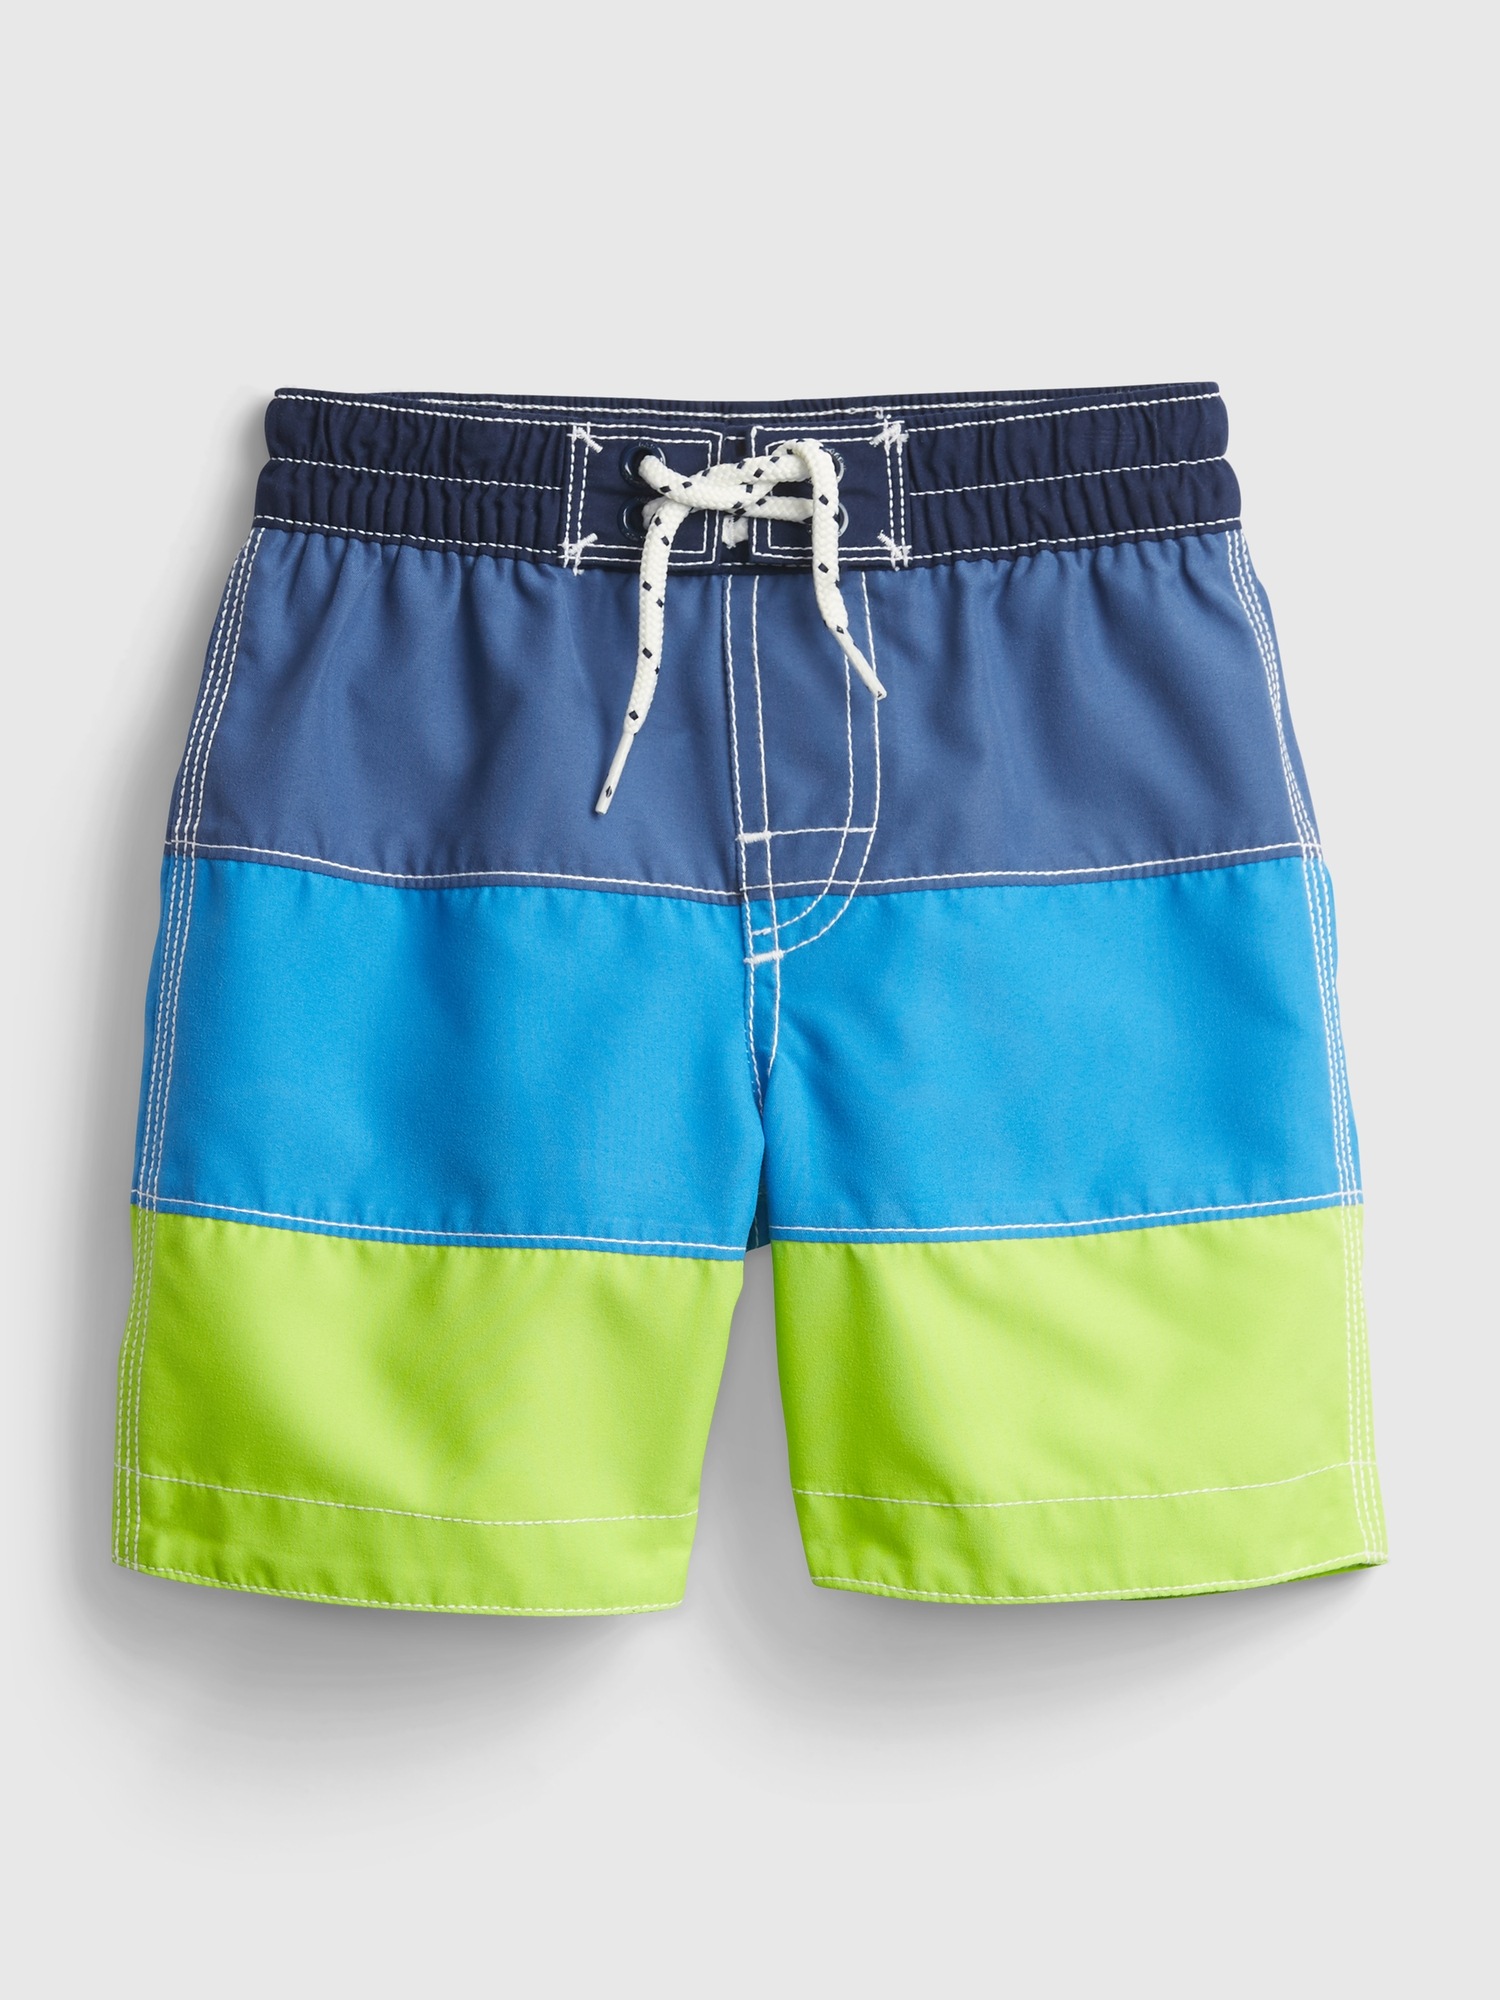 Toddler 100% Recycled Polyester Colorblock Swim Trunks | Gap